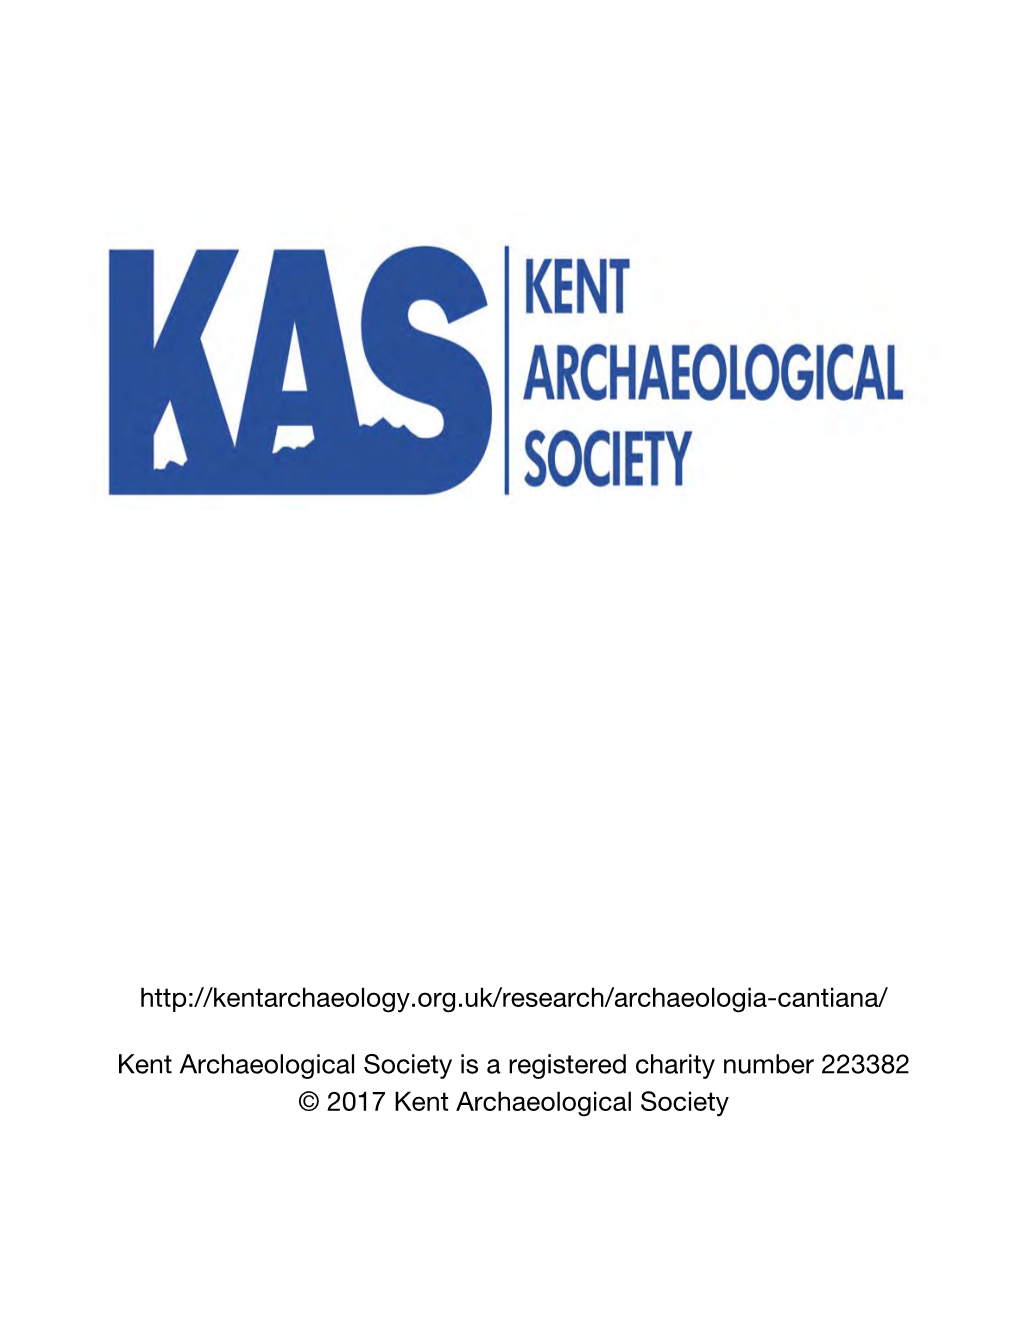 Interim Reports on Recent Work Carried out by the Canterbury Archaeological Trust